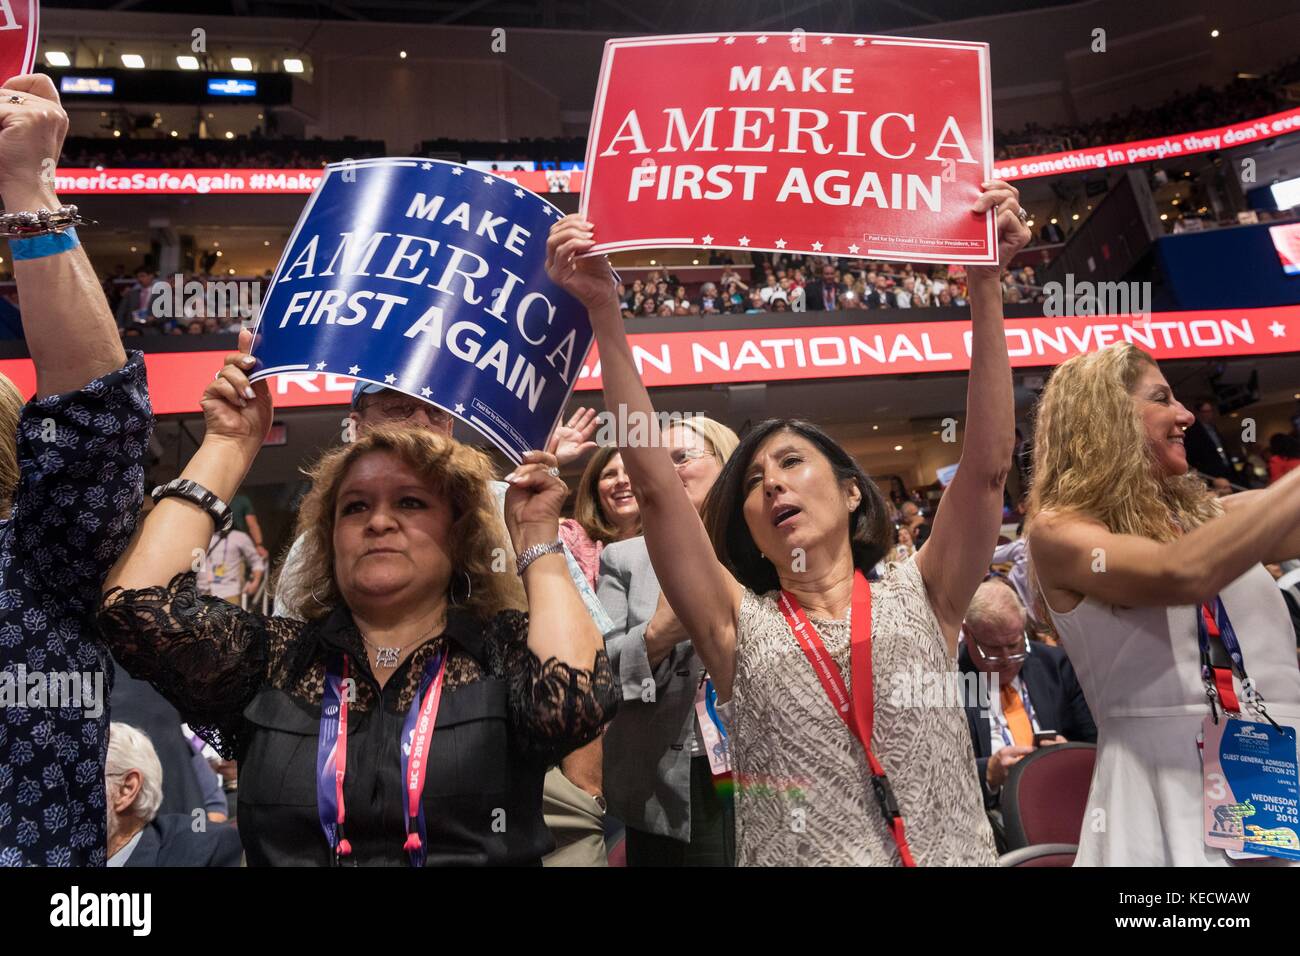 Gop Delegates Cheer During The Republican National Convention July 20 2016 In Cleveland Ohio